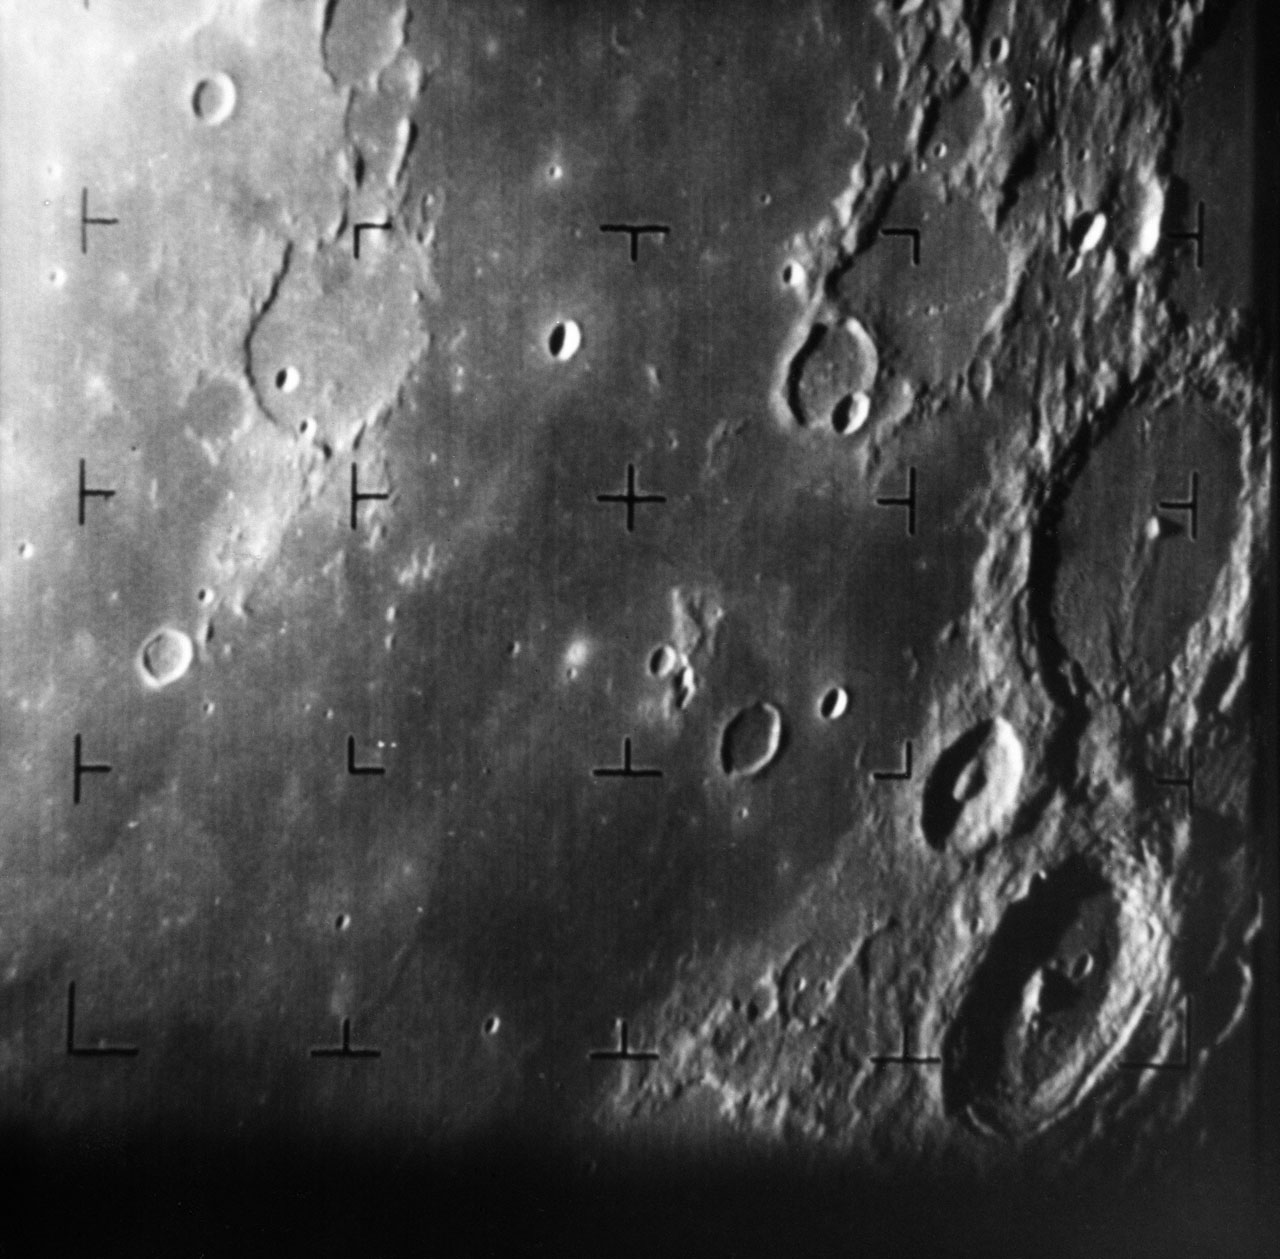 An image of the lunar surface taken by the US Ranger 7 spacecraft in 1964. Image: NASA/JPL-Caltech